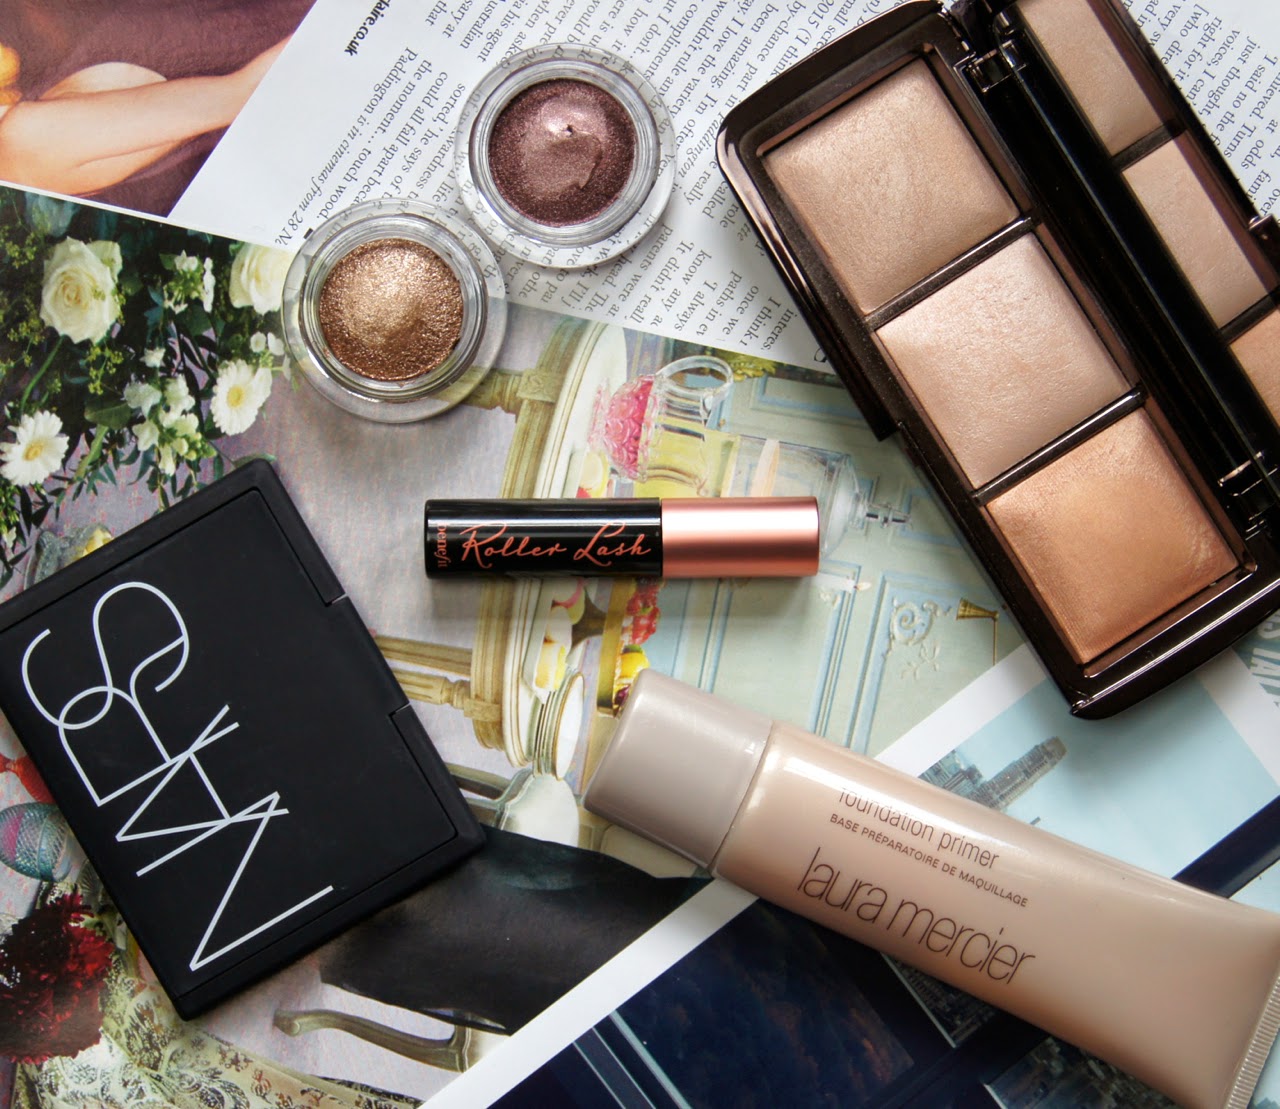 top 5 premium makeup products worth the hype chanel nars hourglass laura mercier benefit